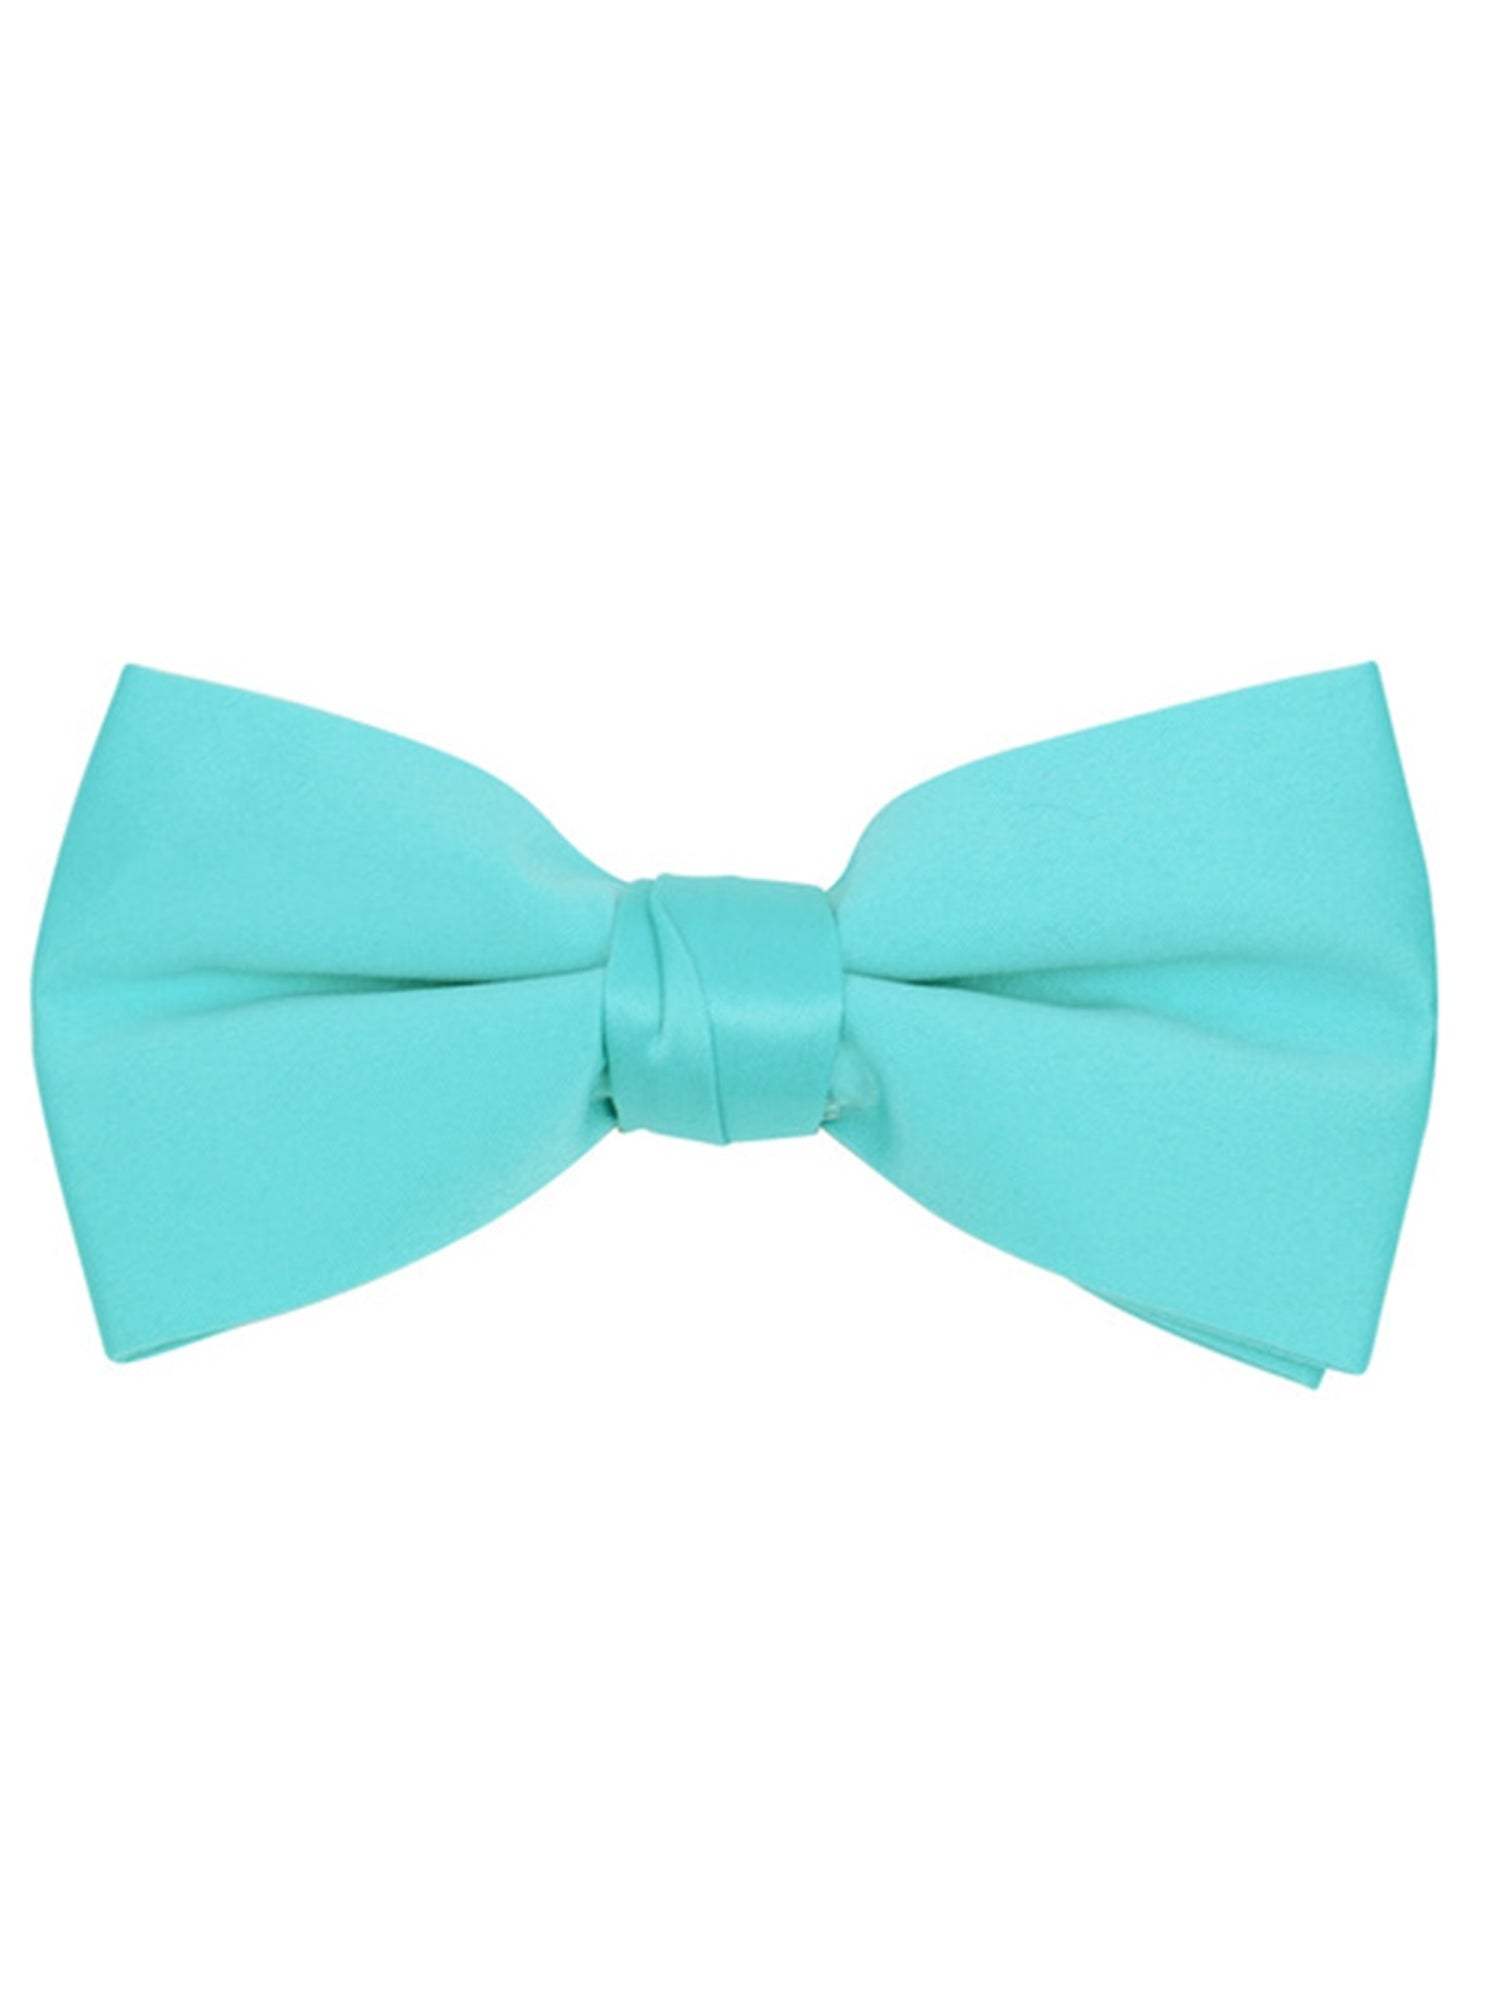 Young Boy's Pre-tied Clip On Bow Tie - Formal Tuxedo Solid Color Boy's Solid Color Bow Tie TheDapperTie Turquoise One Size 